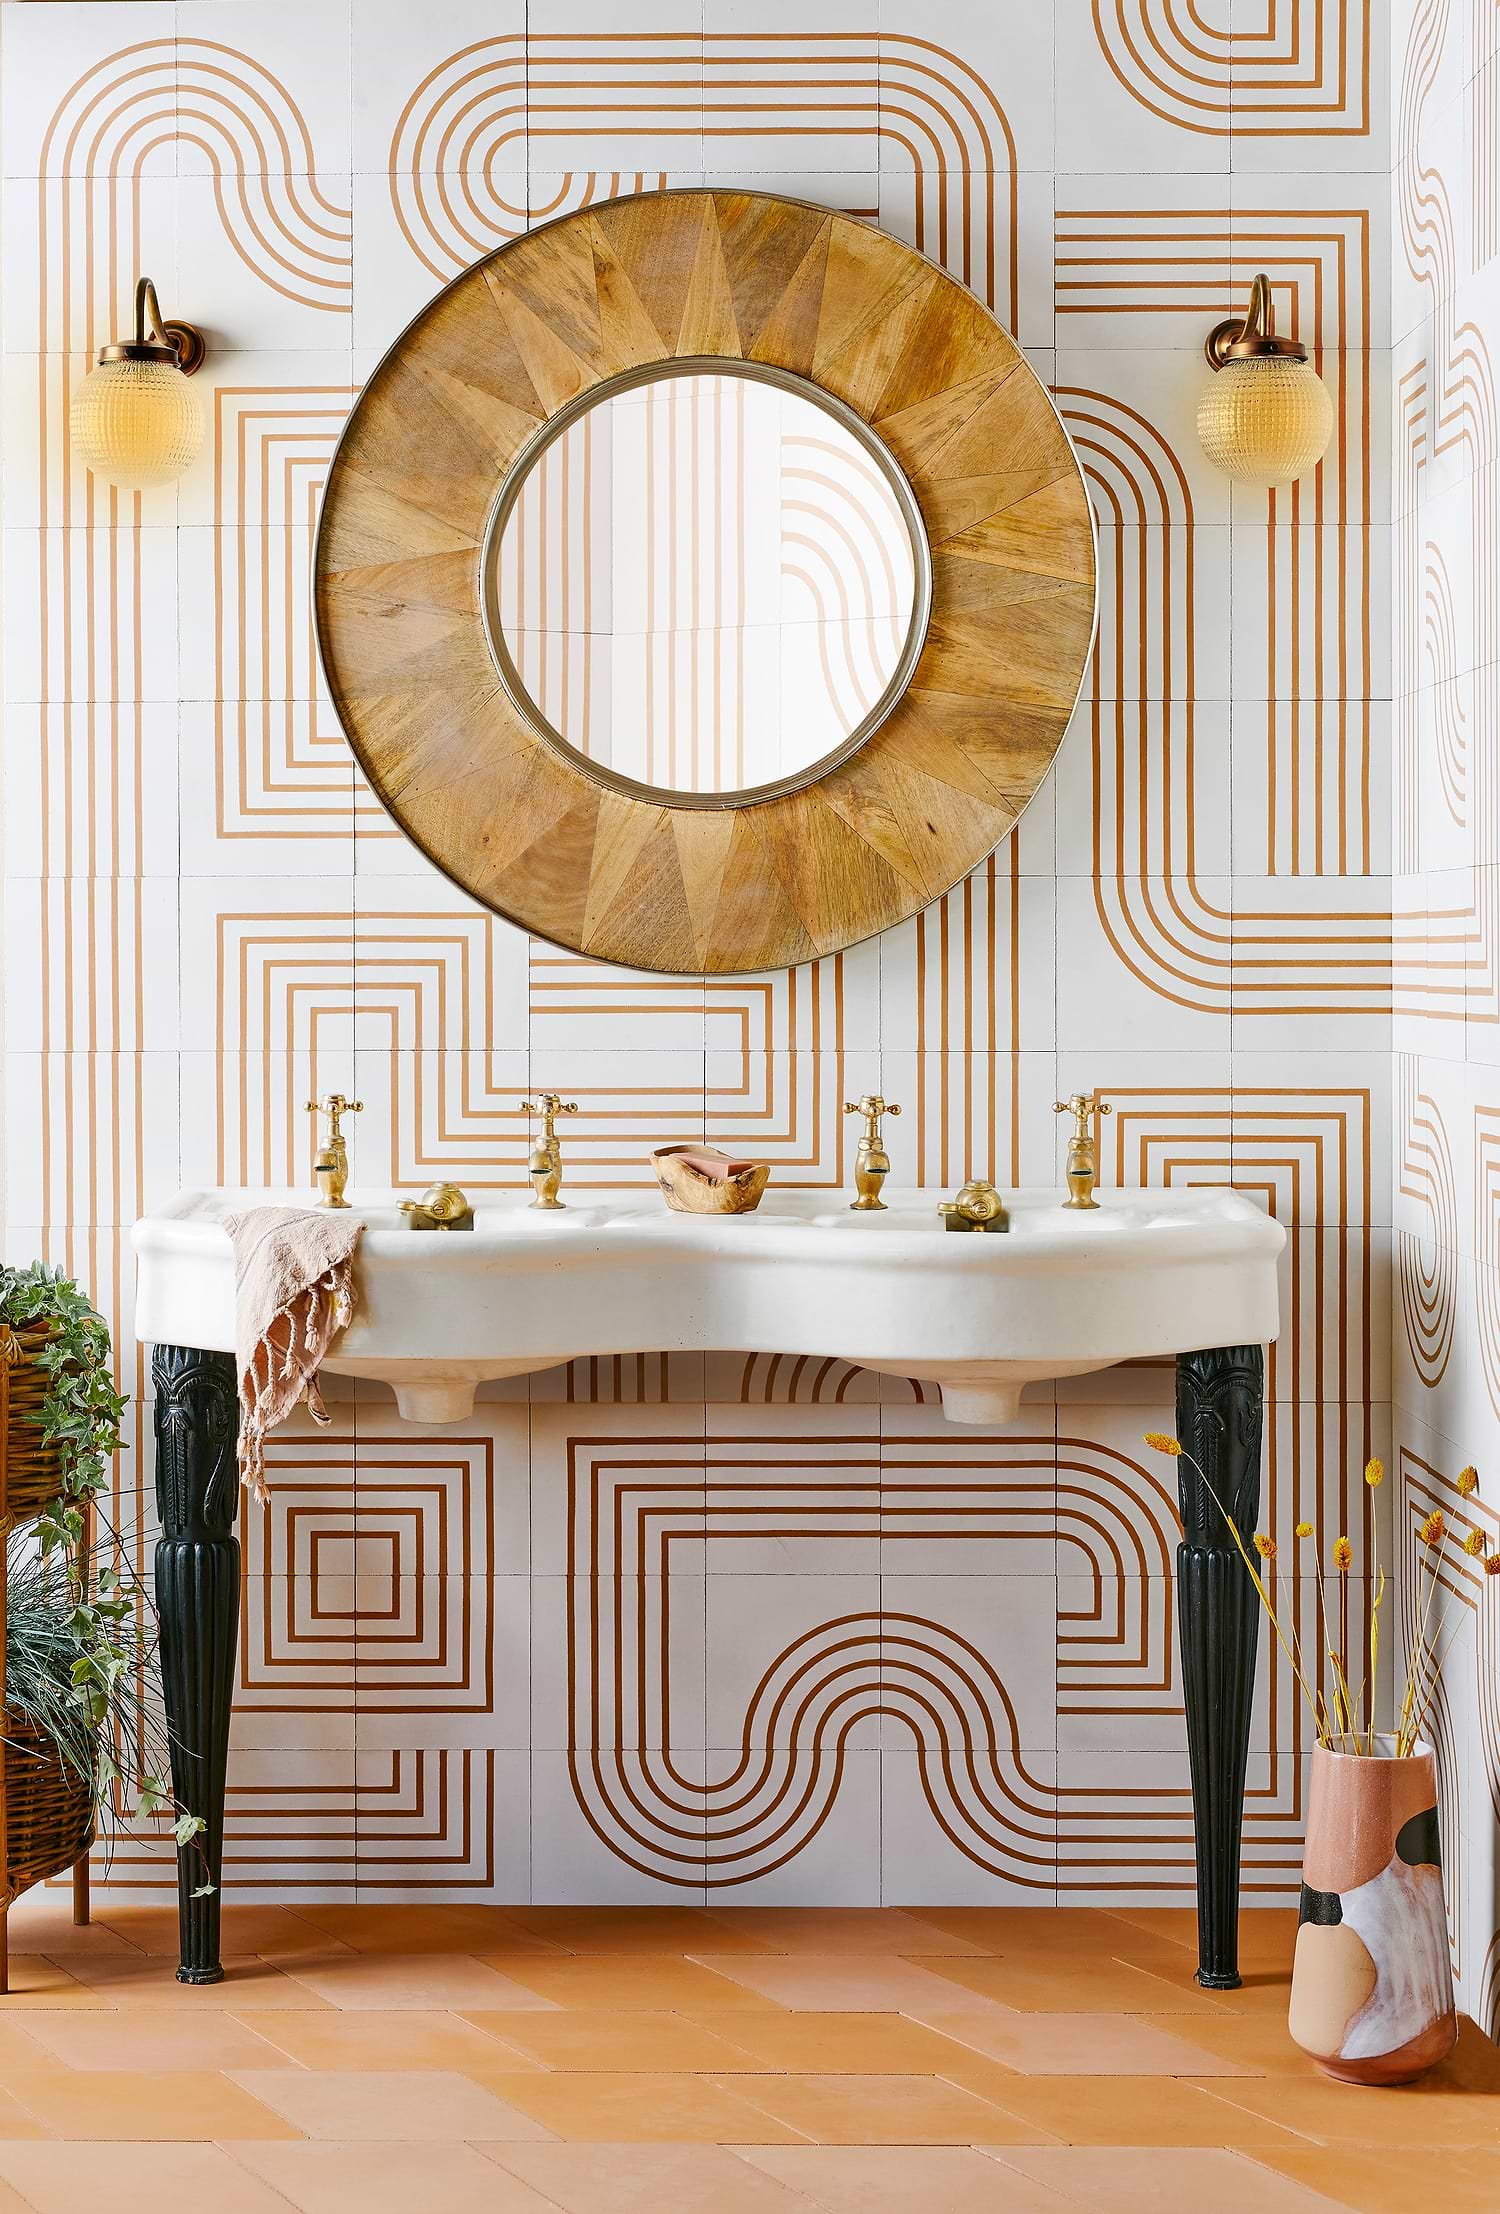 Bert & May modern bathroom Marigold Maze Three Tile collection stocked by Hyperion Tiles